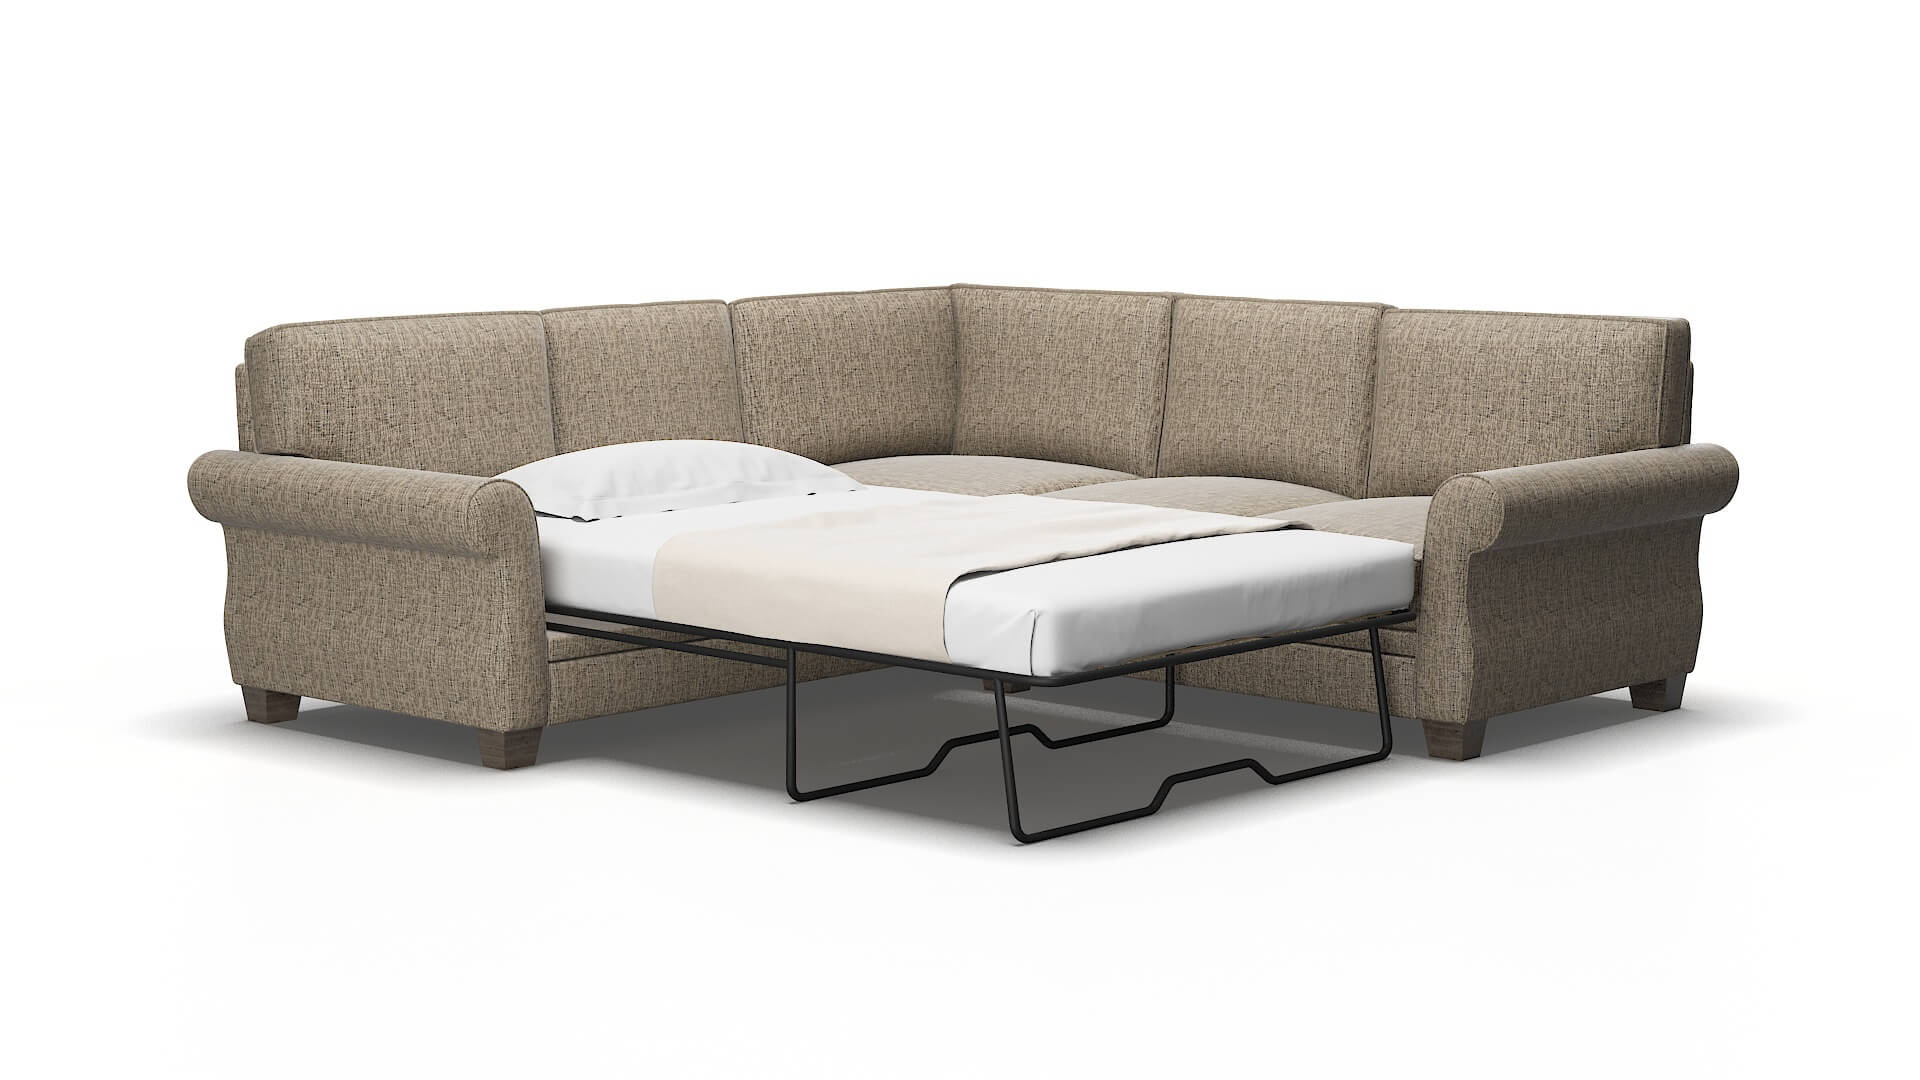 Rome Solifestyle 51 Sectional Sleeper 2